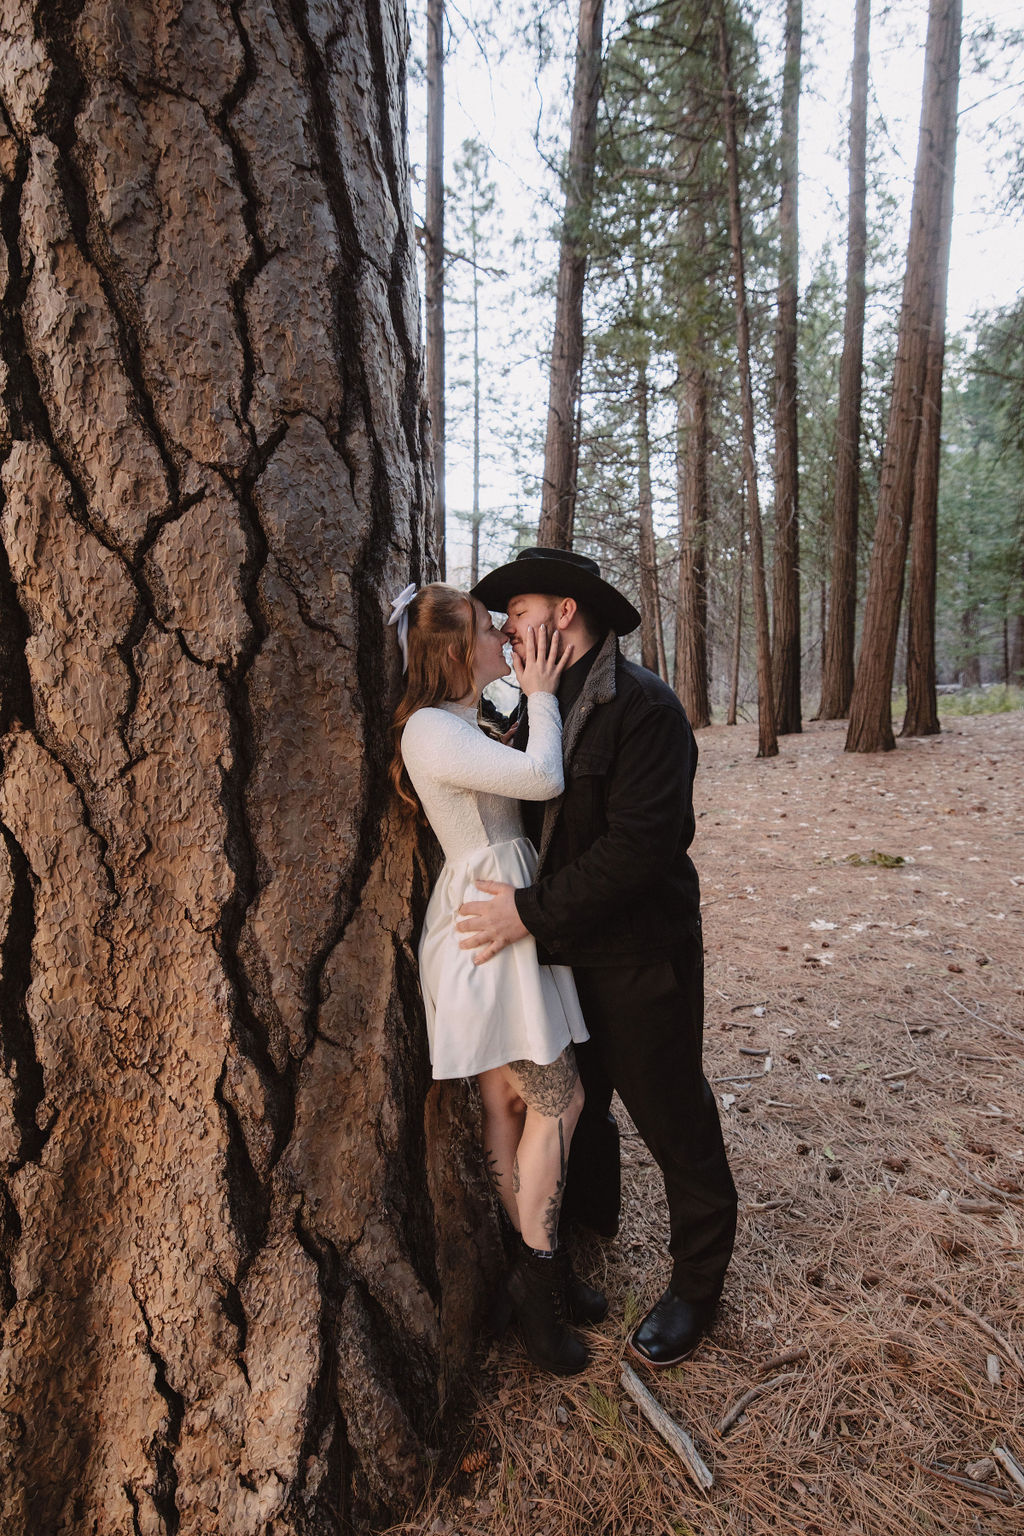 A couple embracing and kissing next to a large tree in a forest, the man in a black suit and hat, and the woman in a white dress.